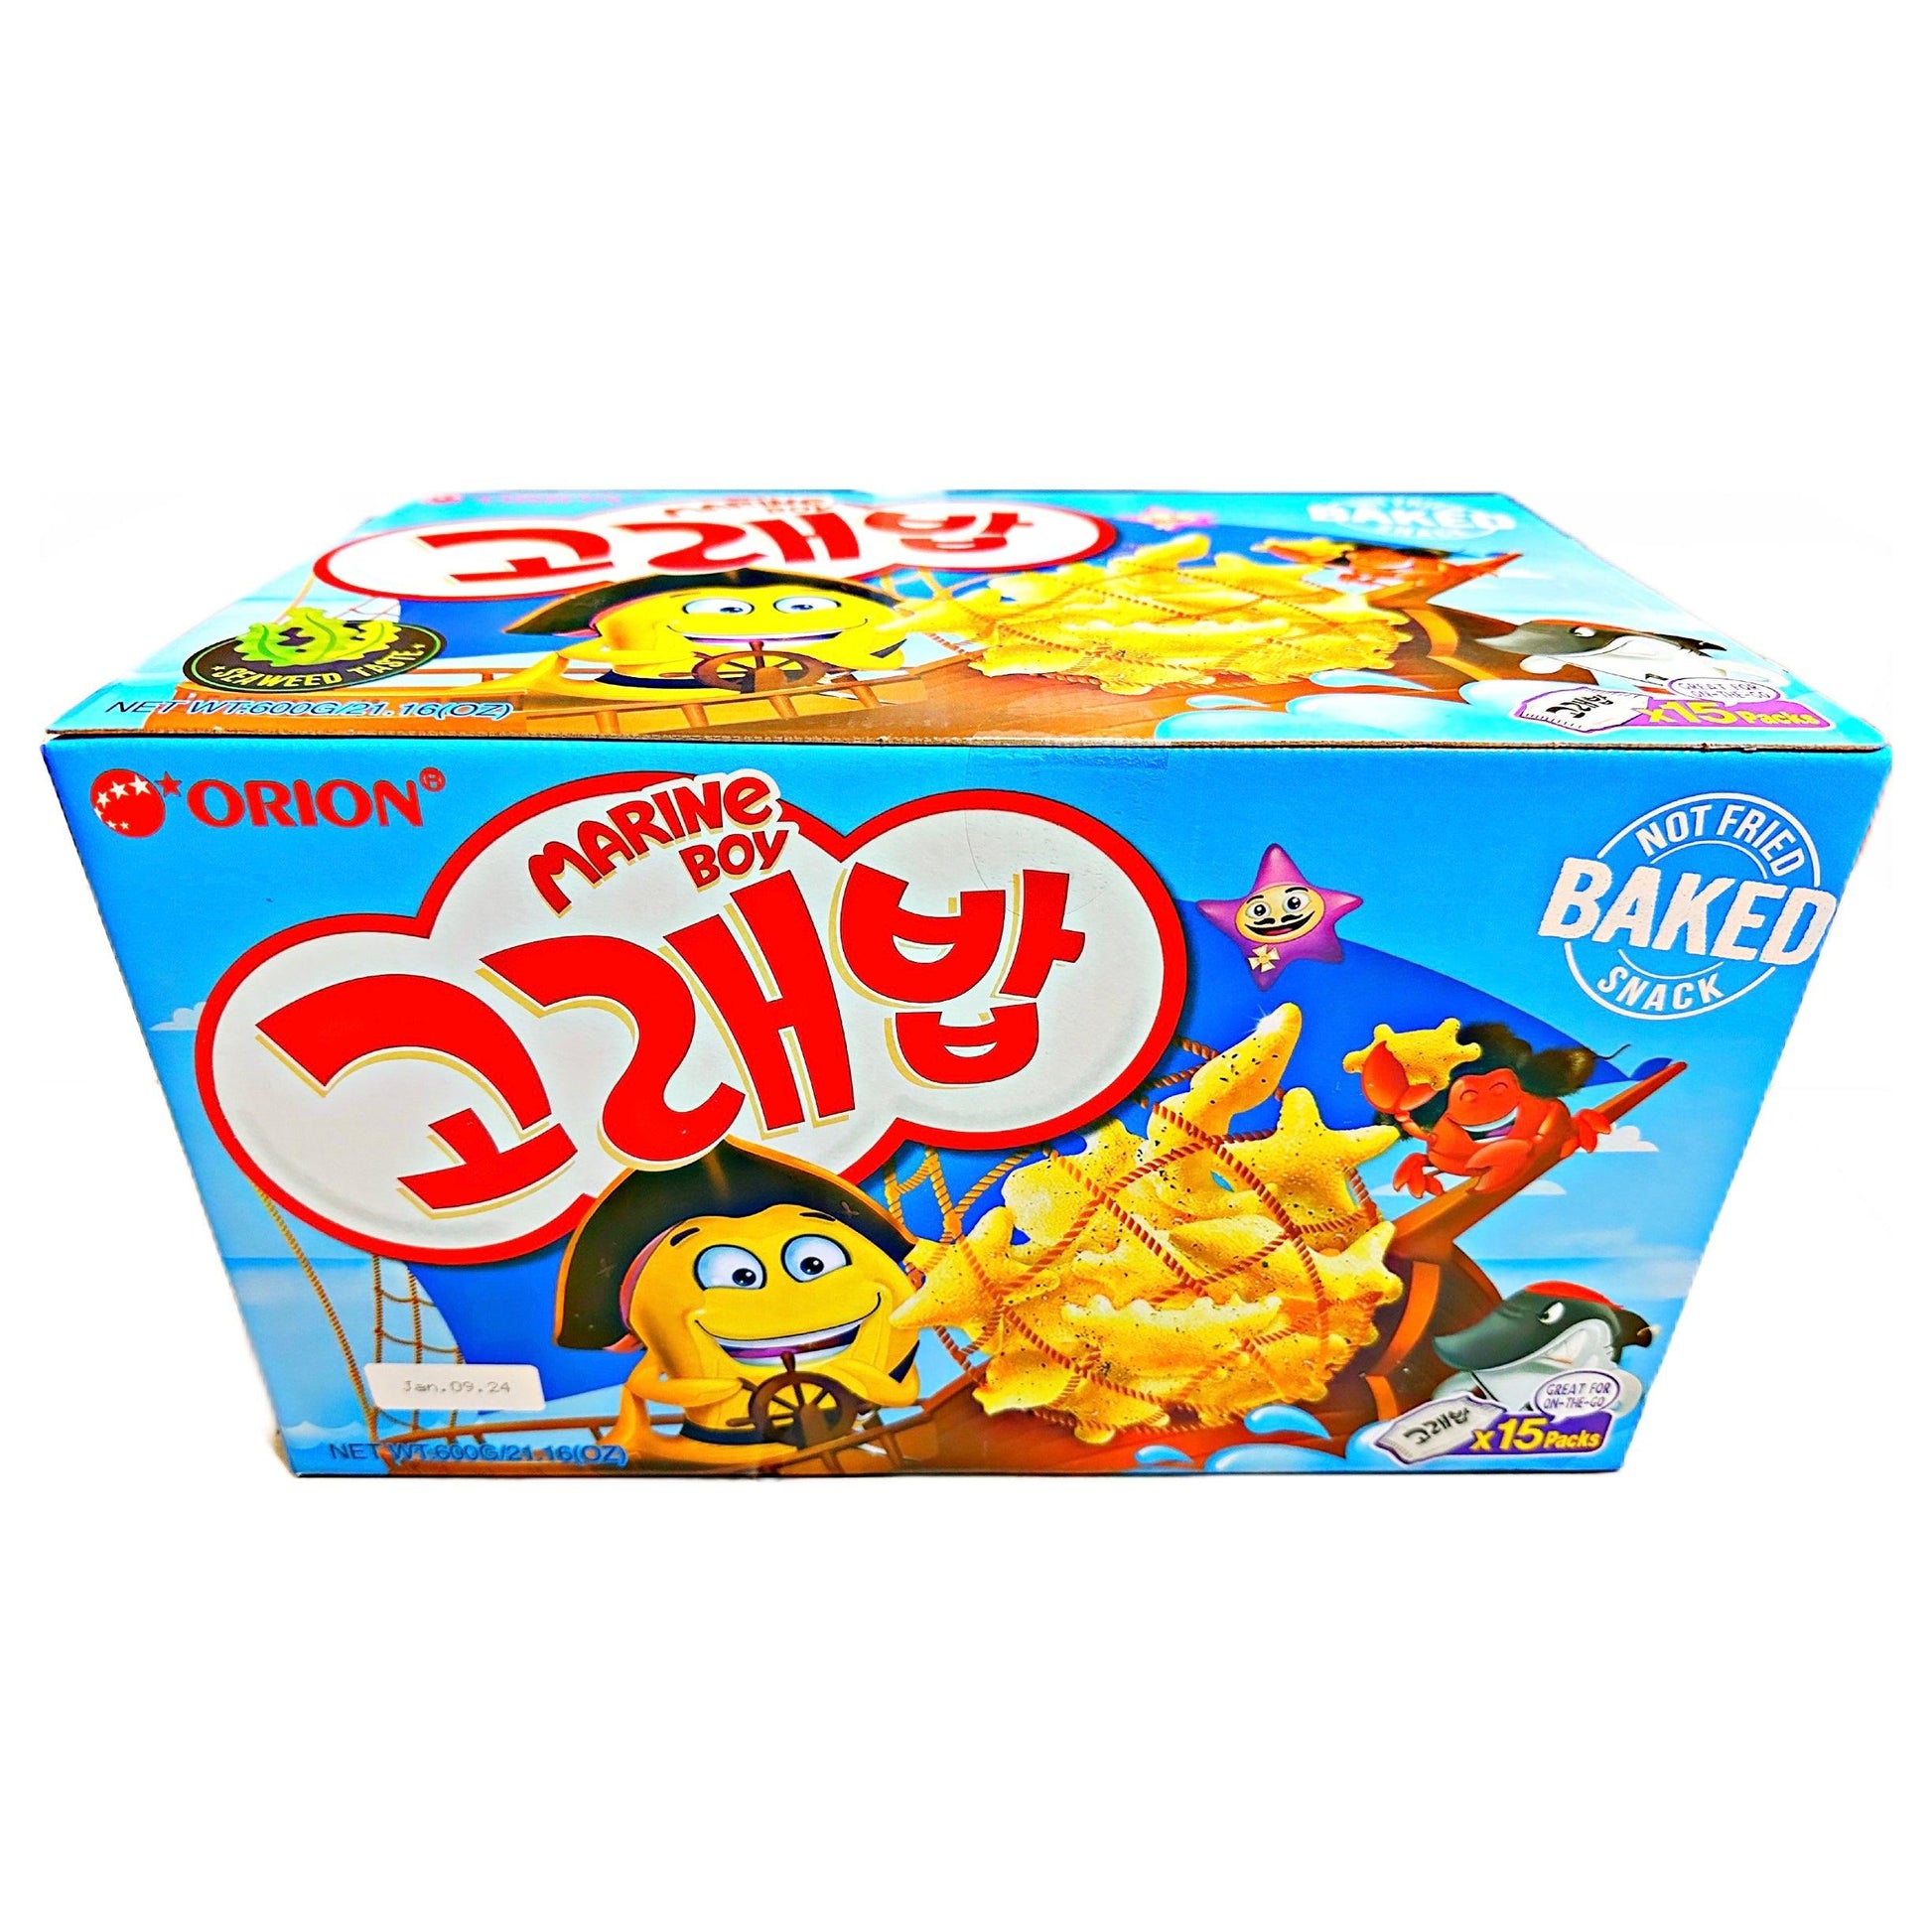 Orion Baked Marine Boy Sea Creatures Shaped 15x40g - The Snacks Box: Online  Asian Grocery Store in Canada